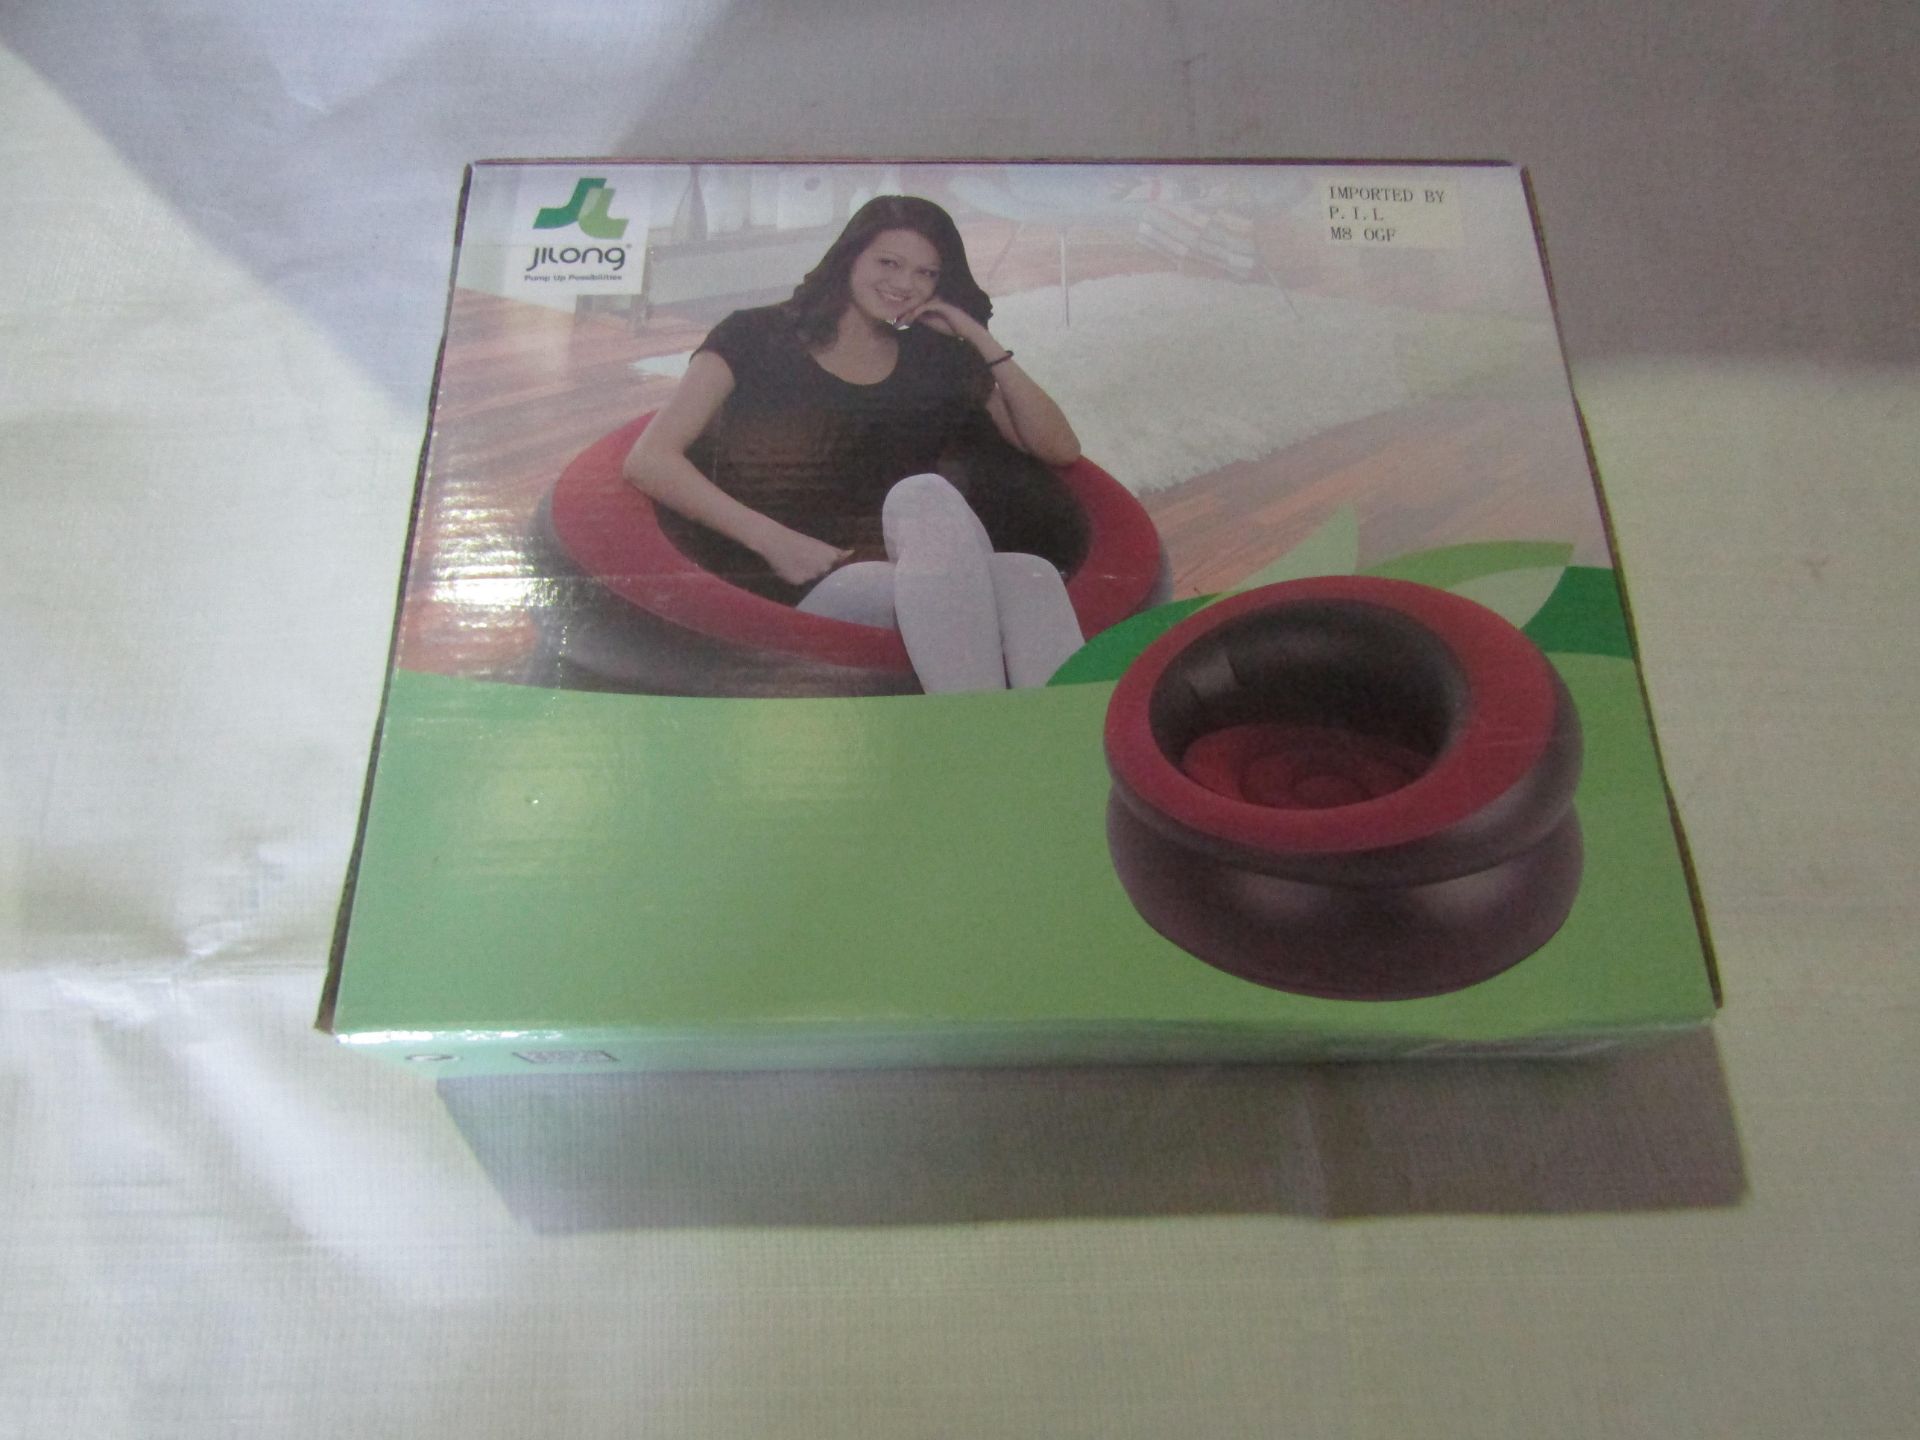 Jilong Single Inflatable Chair For Indoor & Outdoor Use - Unchecked & Boxed.